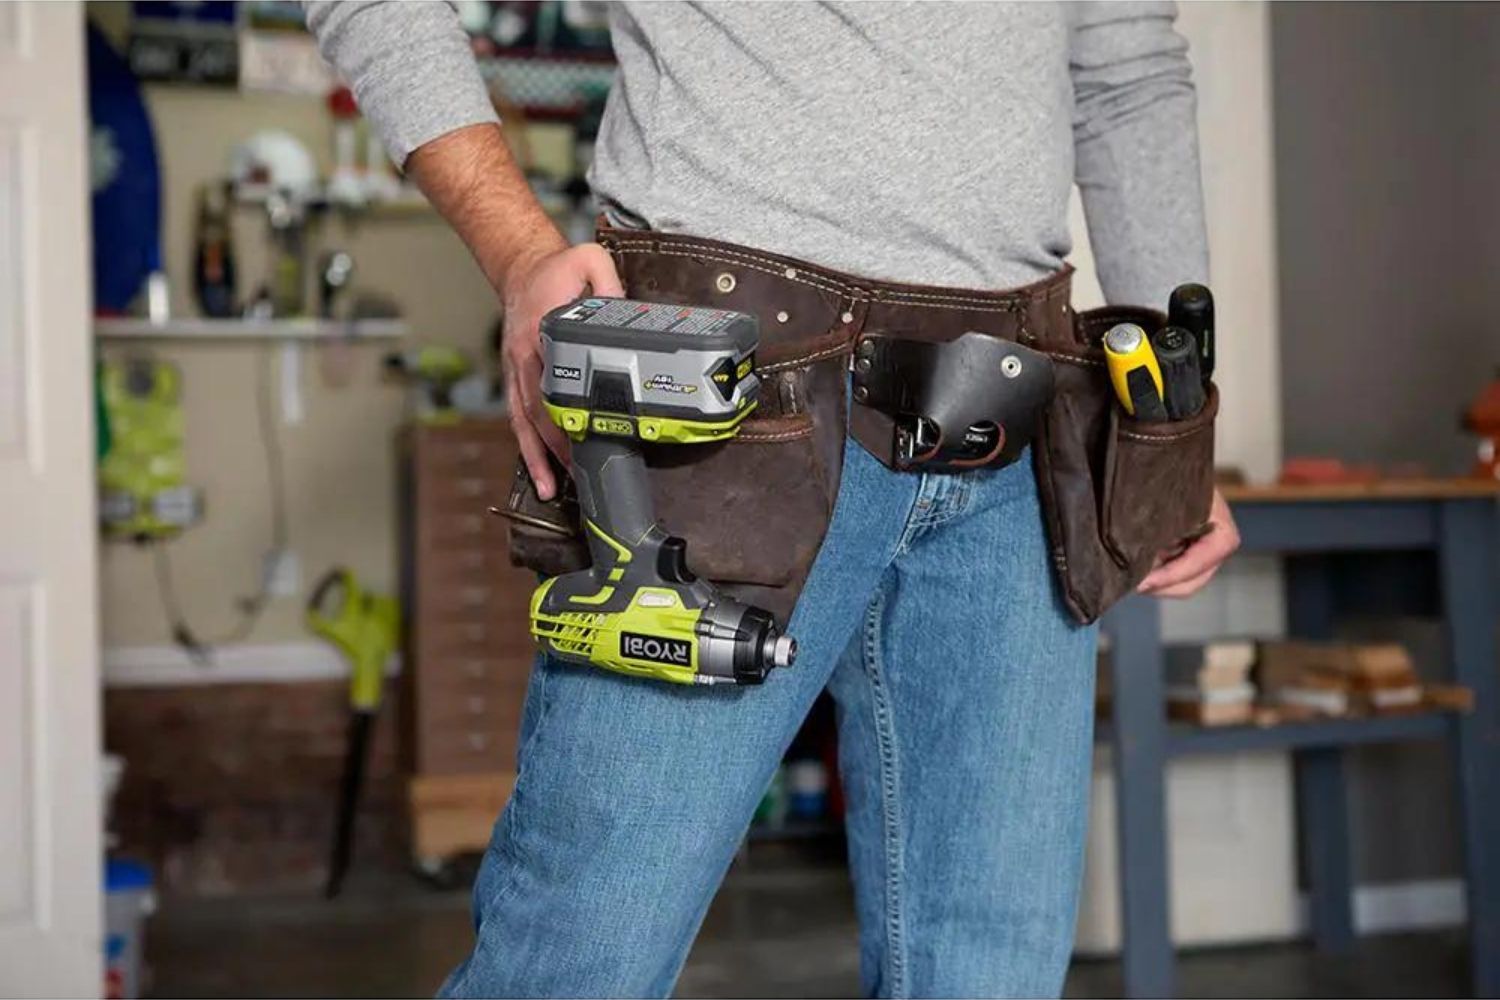 A person wearing a tool belt that has the best Ryobi drill hanging from it.